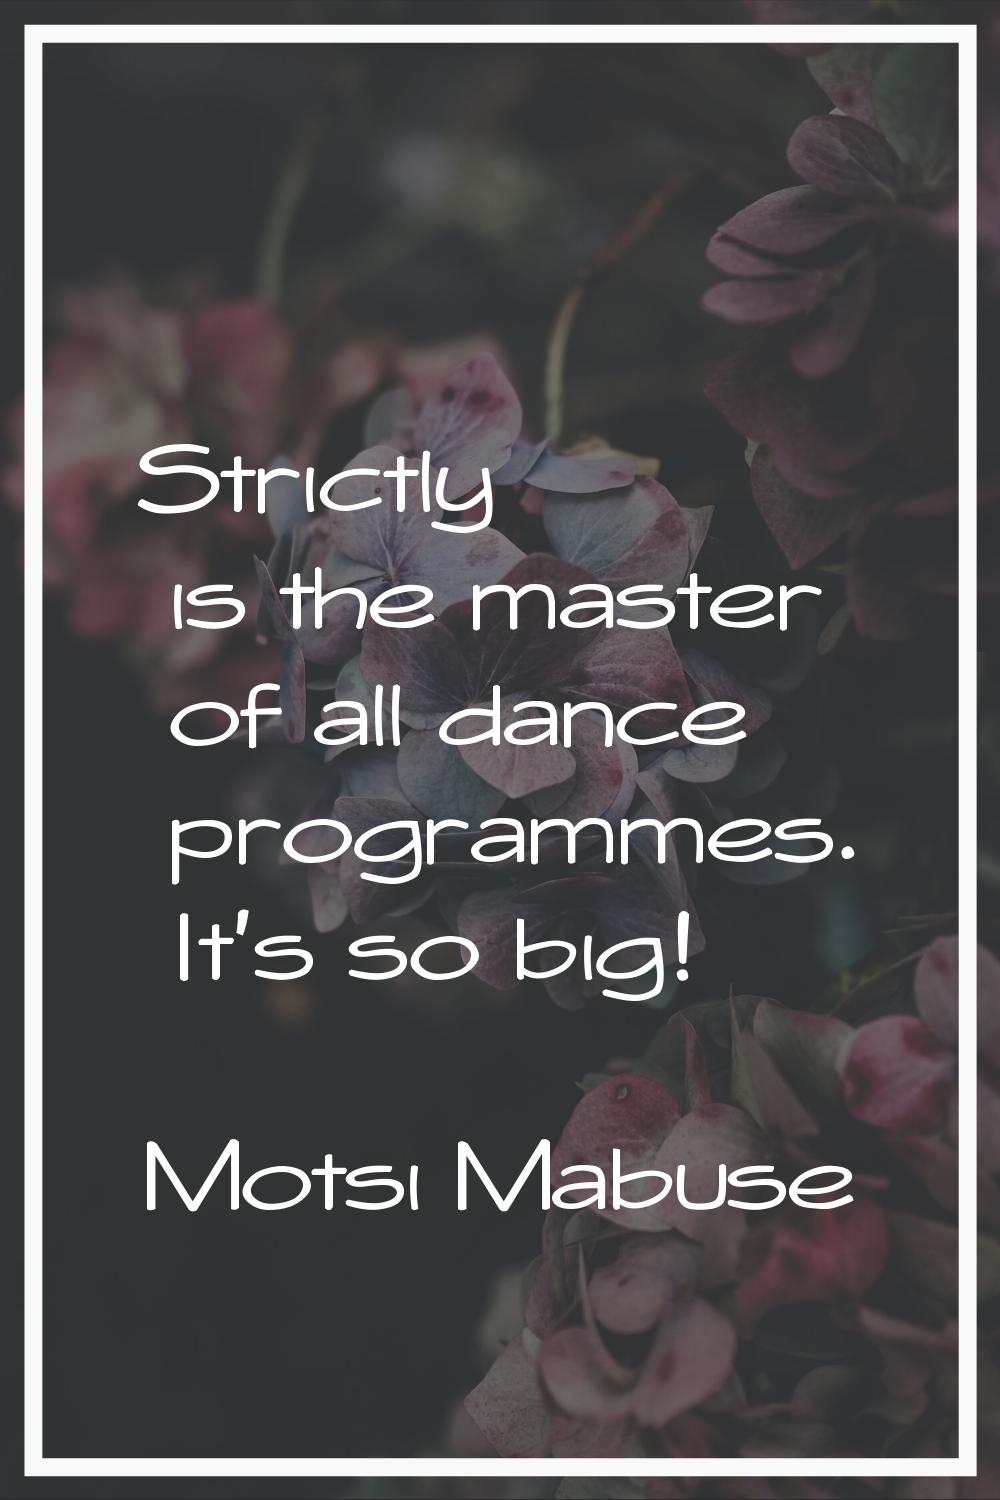 Strictly is the master of all dance programmes. It's so big!